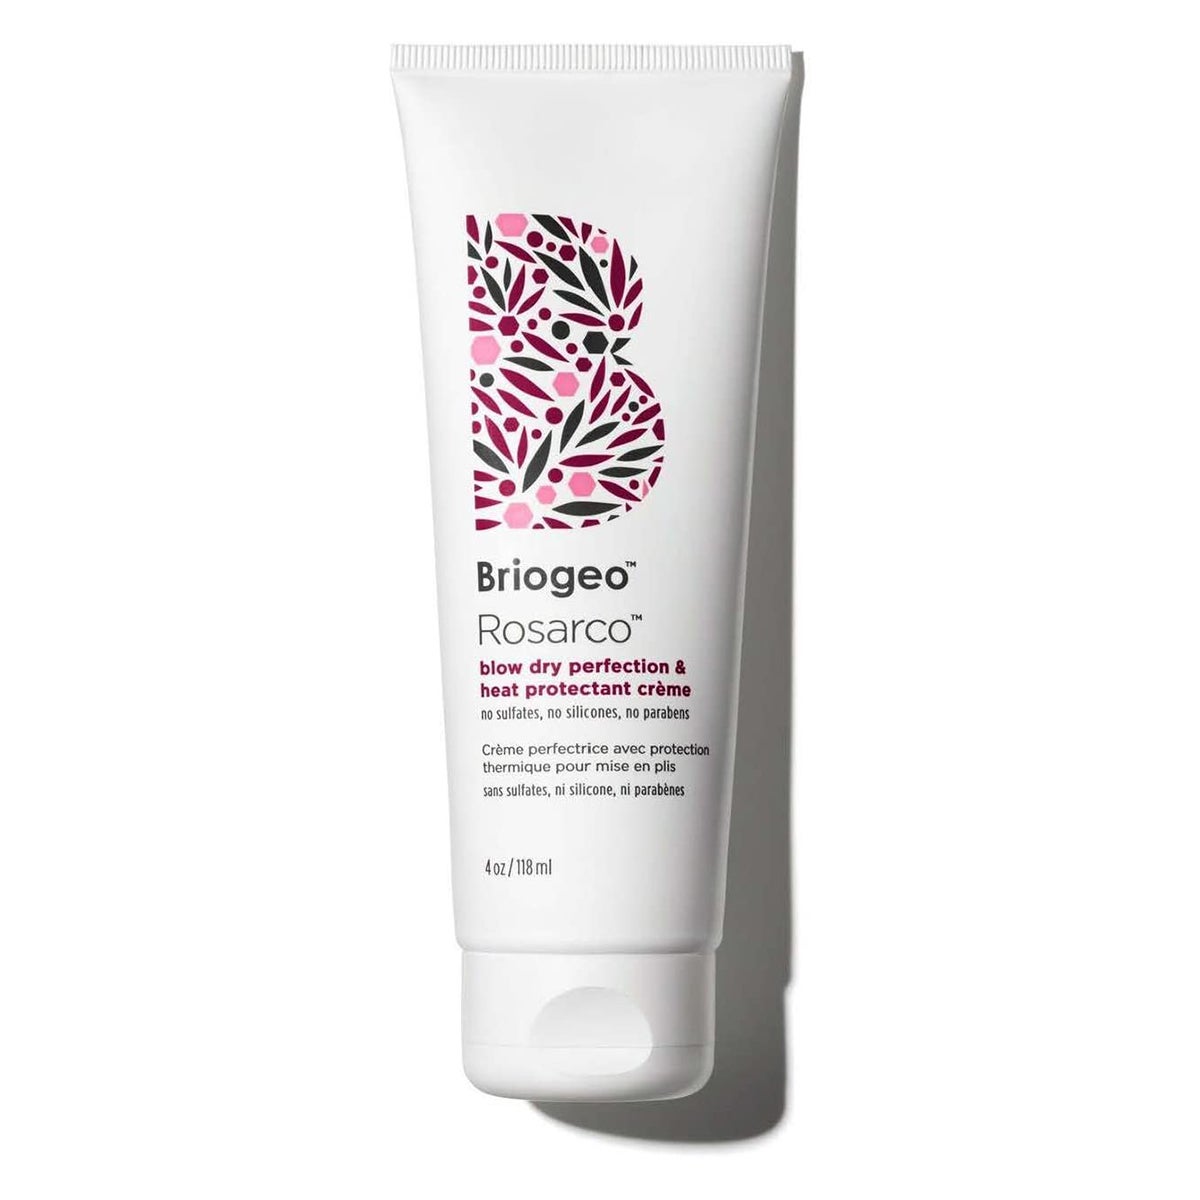 Briogeo Rosarco Blow Dry Perfection and Heat Protectant Crème, Weightless Blow-Dry